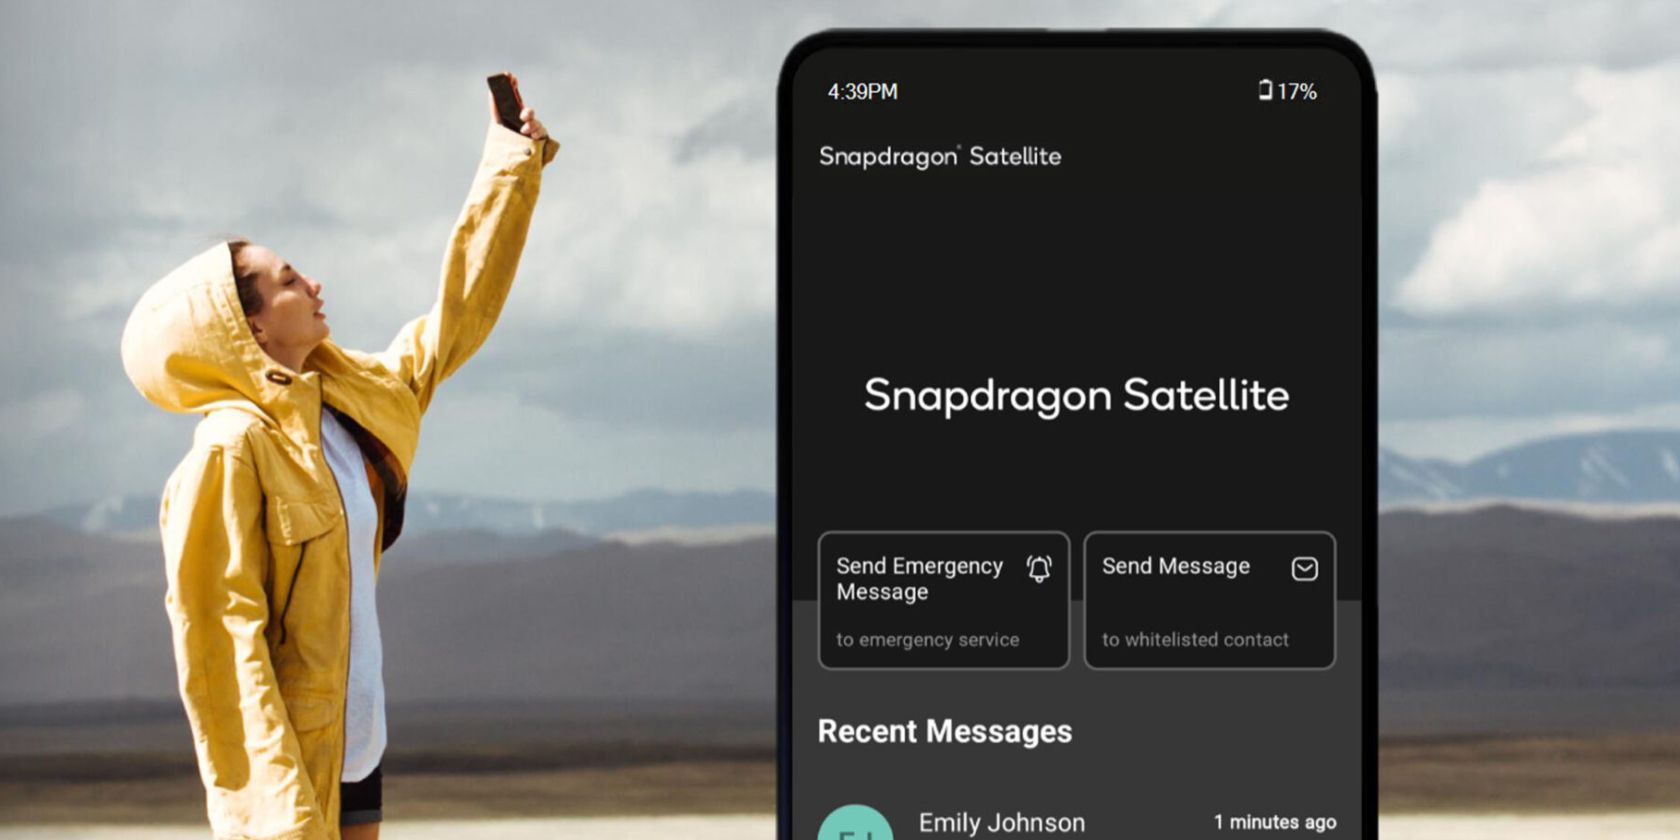 Woman using Android phone pointed at sky, next to graphic of Snapdragon Satellite on phone